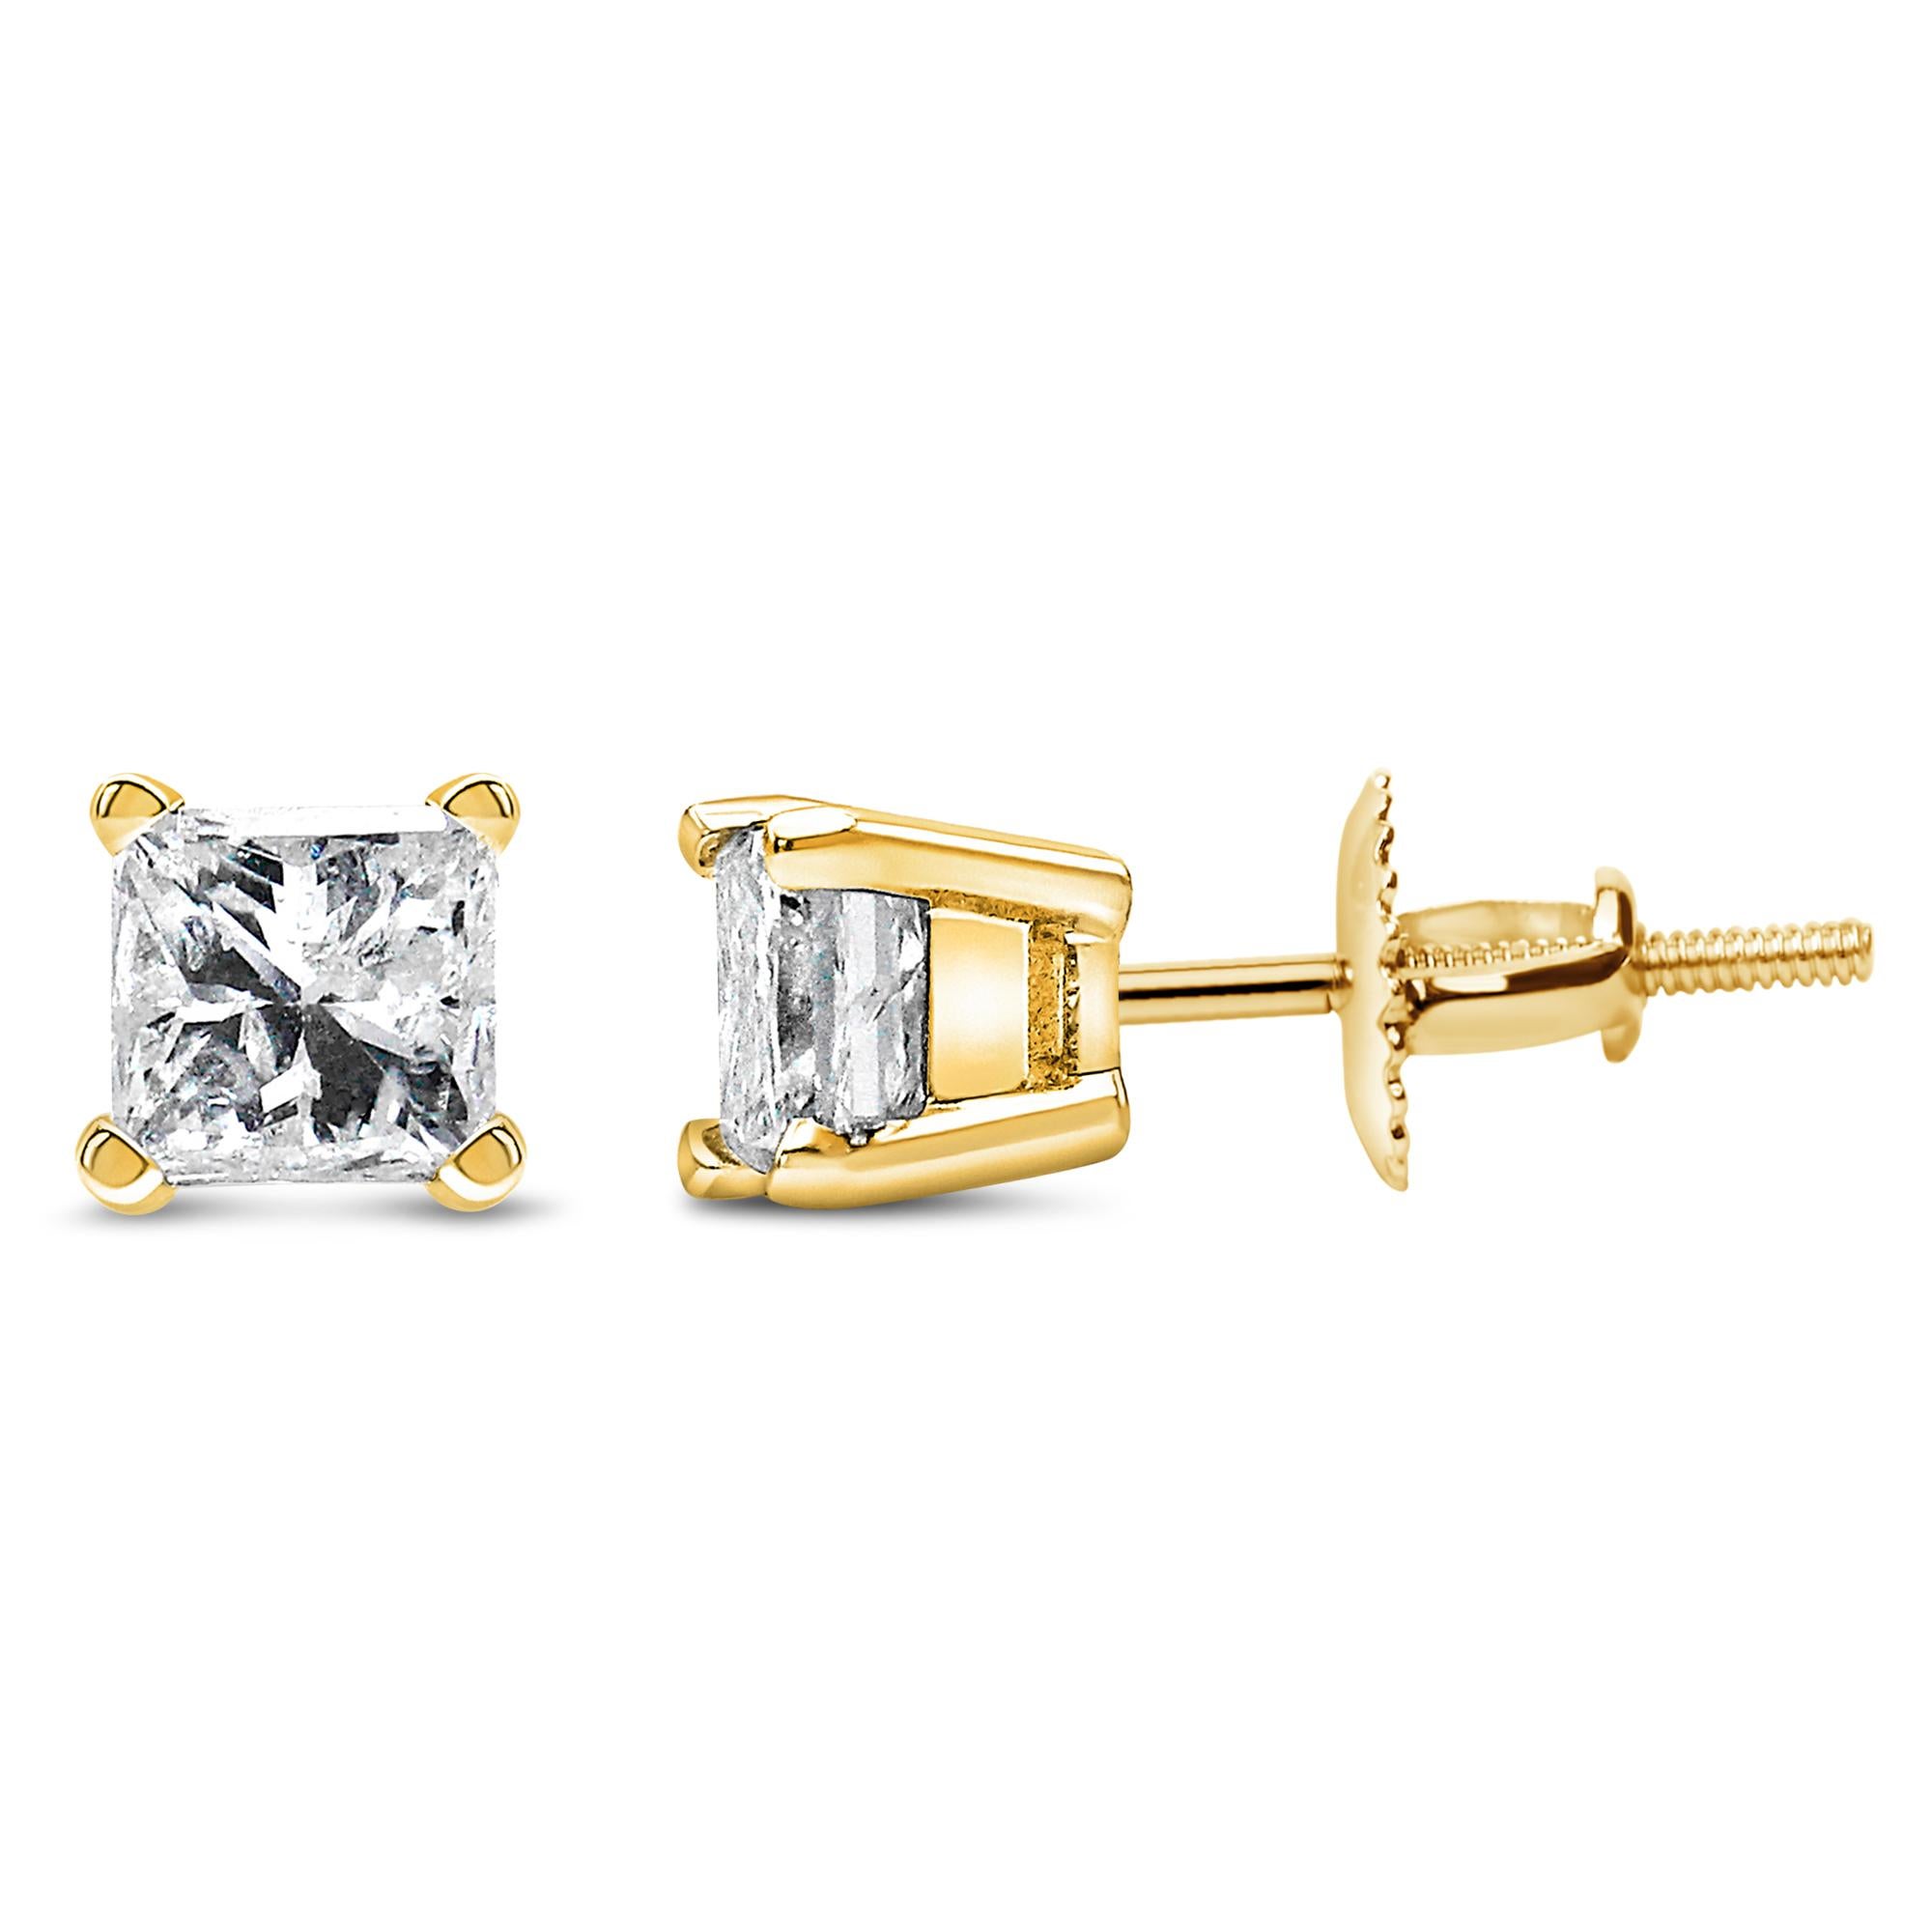 Elevate your style with these stunning IGI certified princess cut solitaire stud earrings. Each earring features a natural diamond weighing 1.0 carat, cut in a classic princess shape and set in a timeless 4-prong setting. The diamonds are of I-J